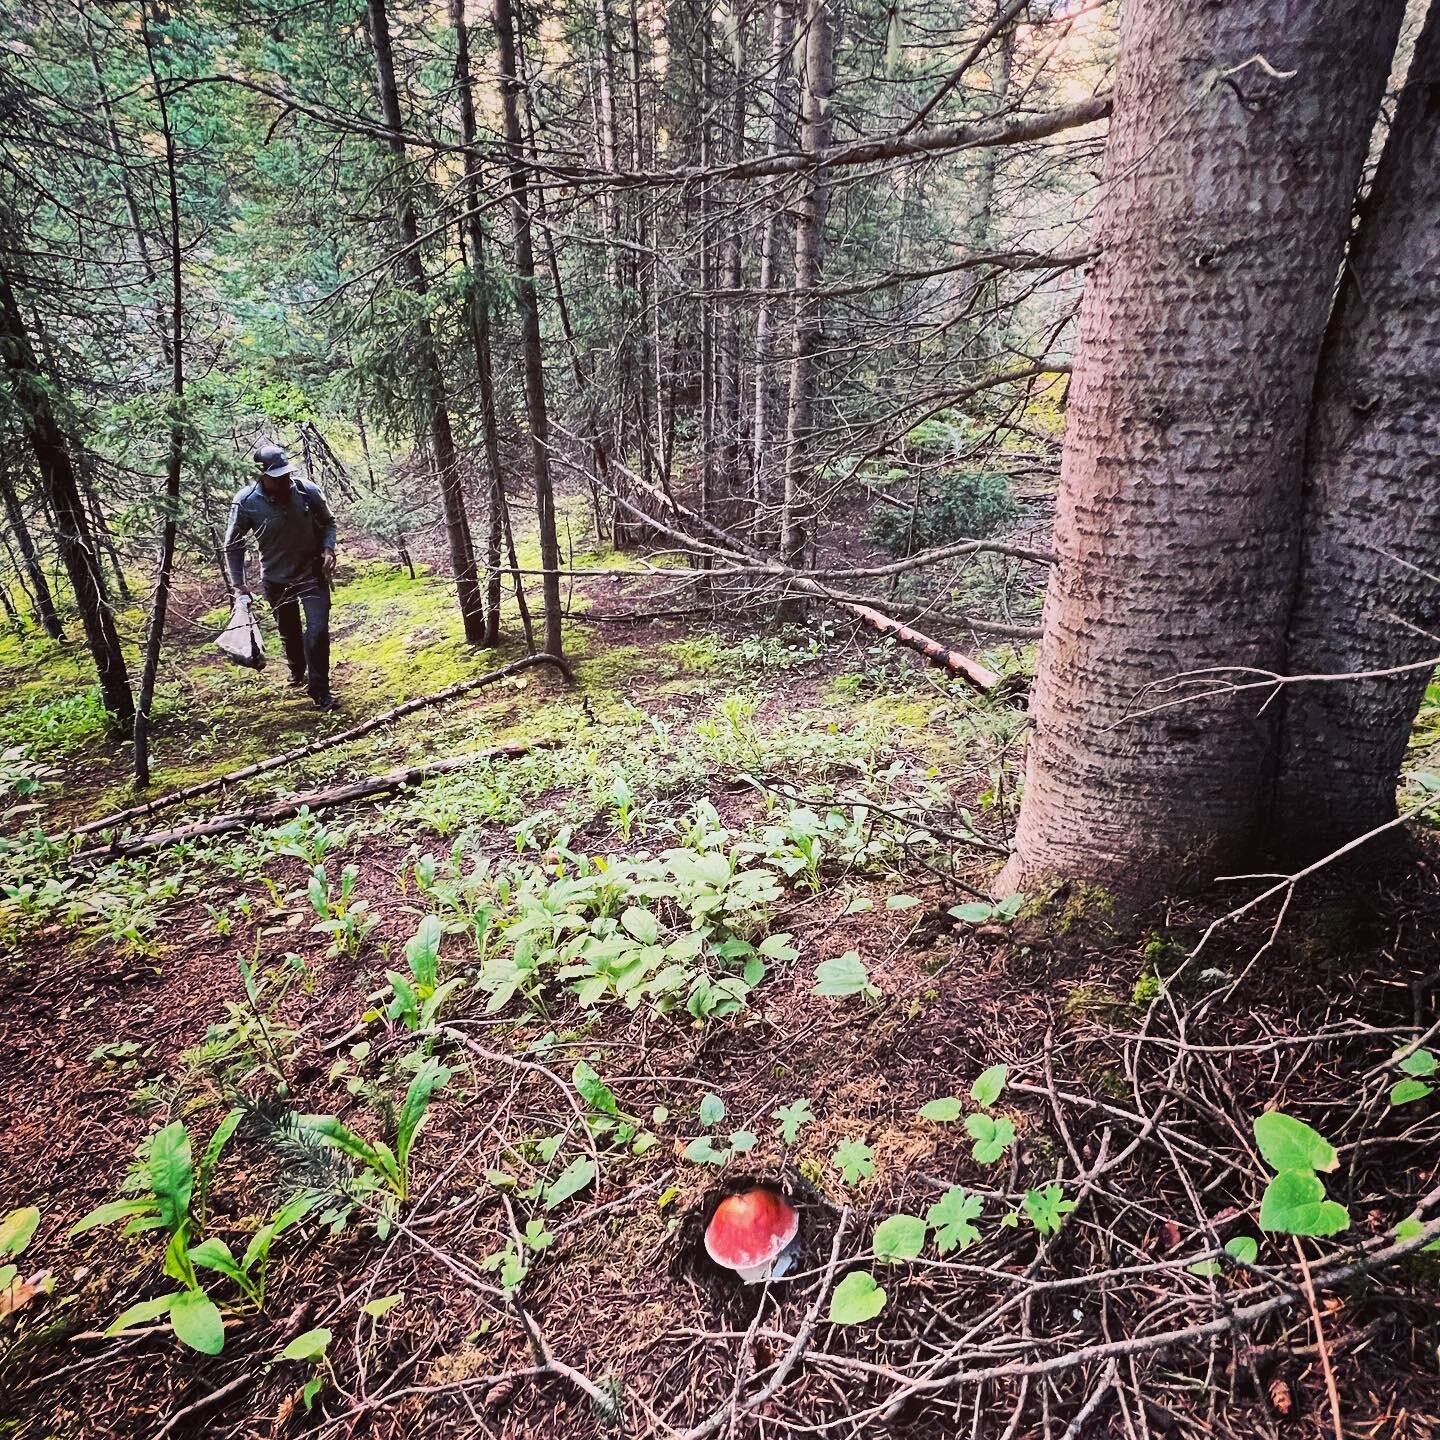 The timid bolete hiding from the approaching forager! The forest floor is in bloom right now with fungi flushing. Thank you rain! Thank you forest! 💕🌲🍄

#telluridearborist #arboristservices #telluridetreecare #arborist #arboristlife #mountainlife 